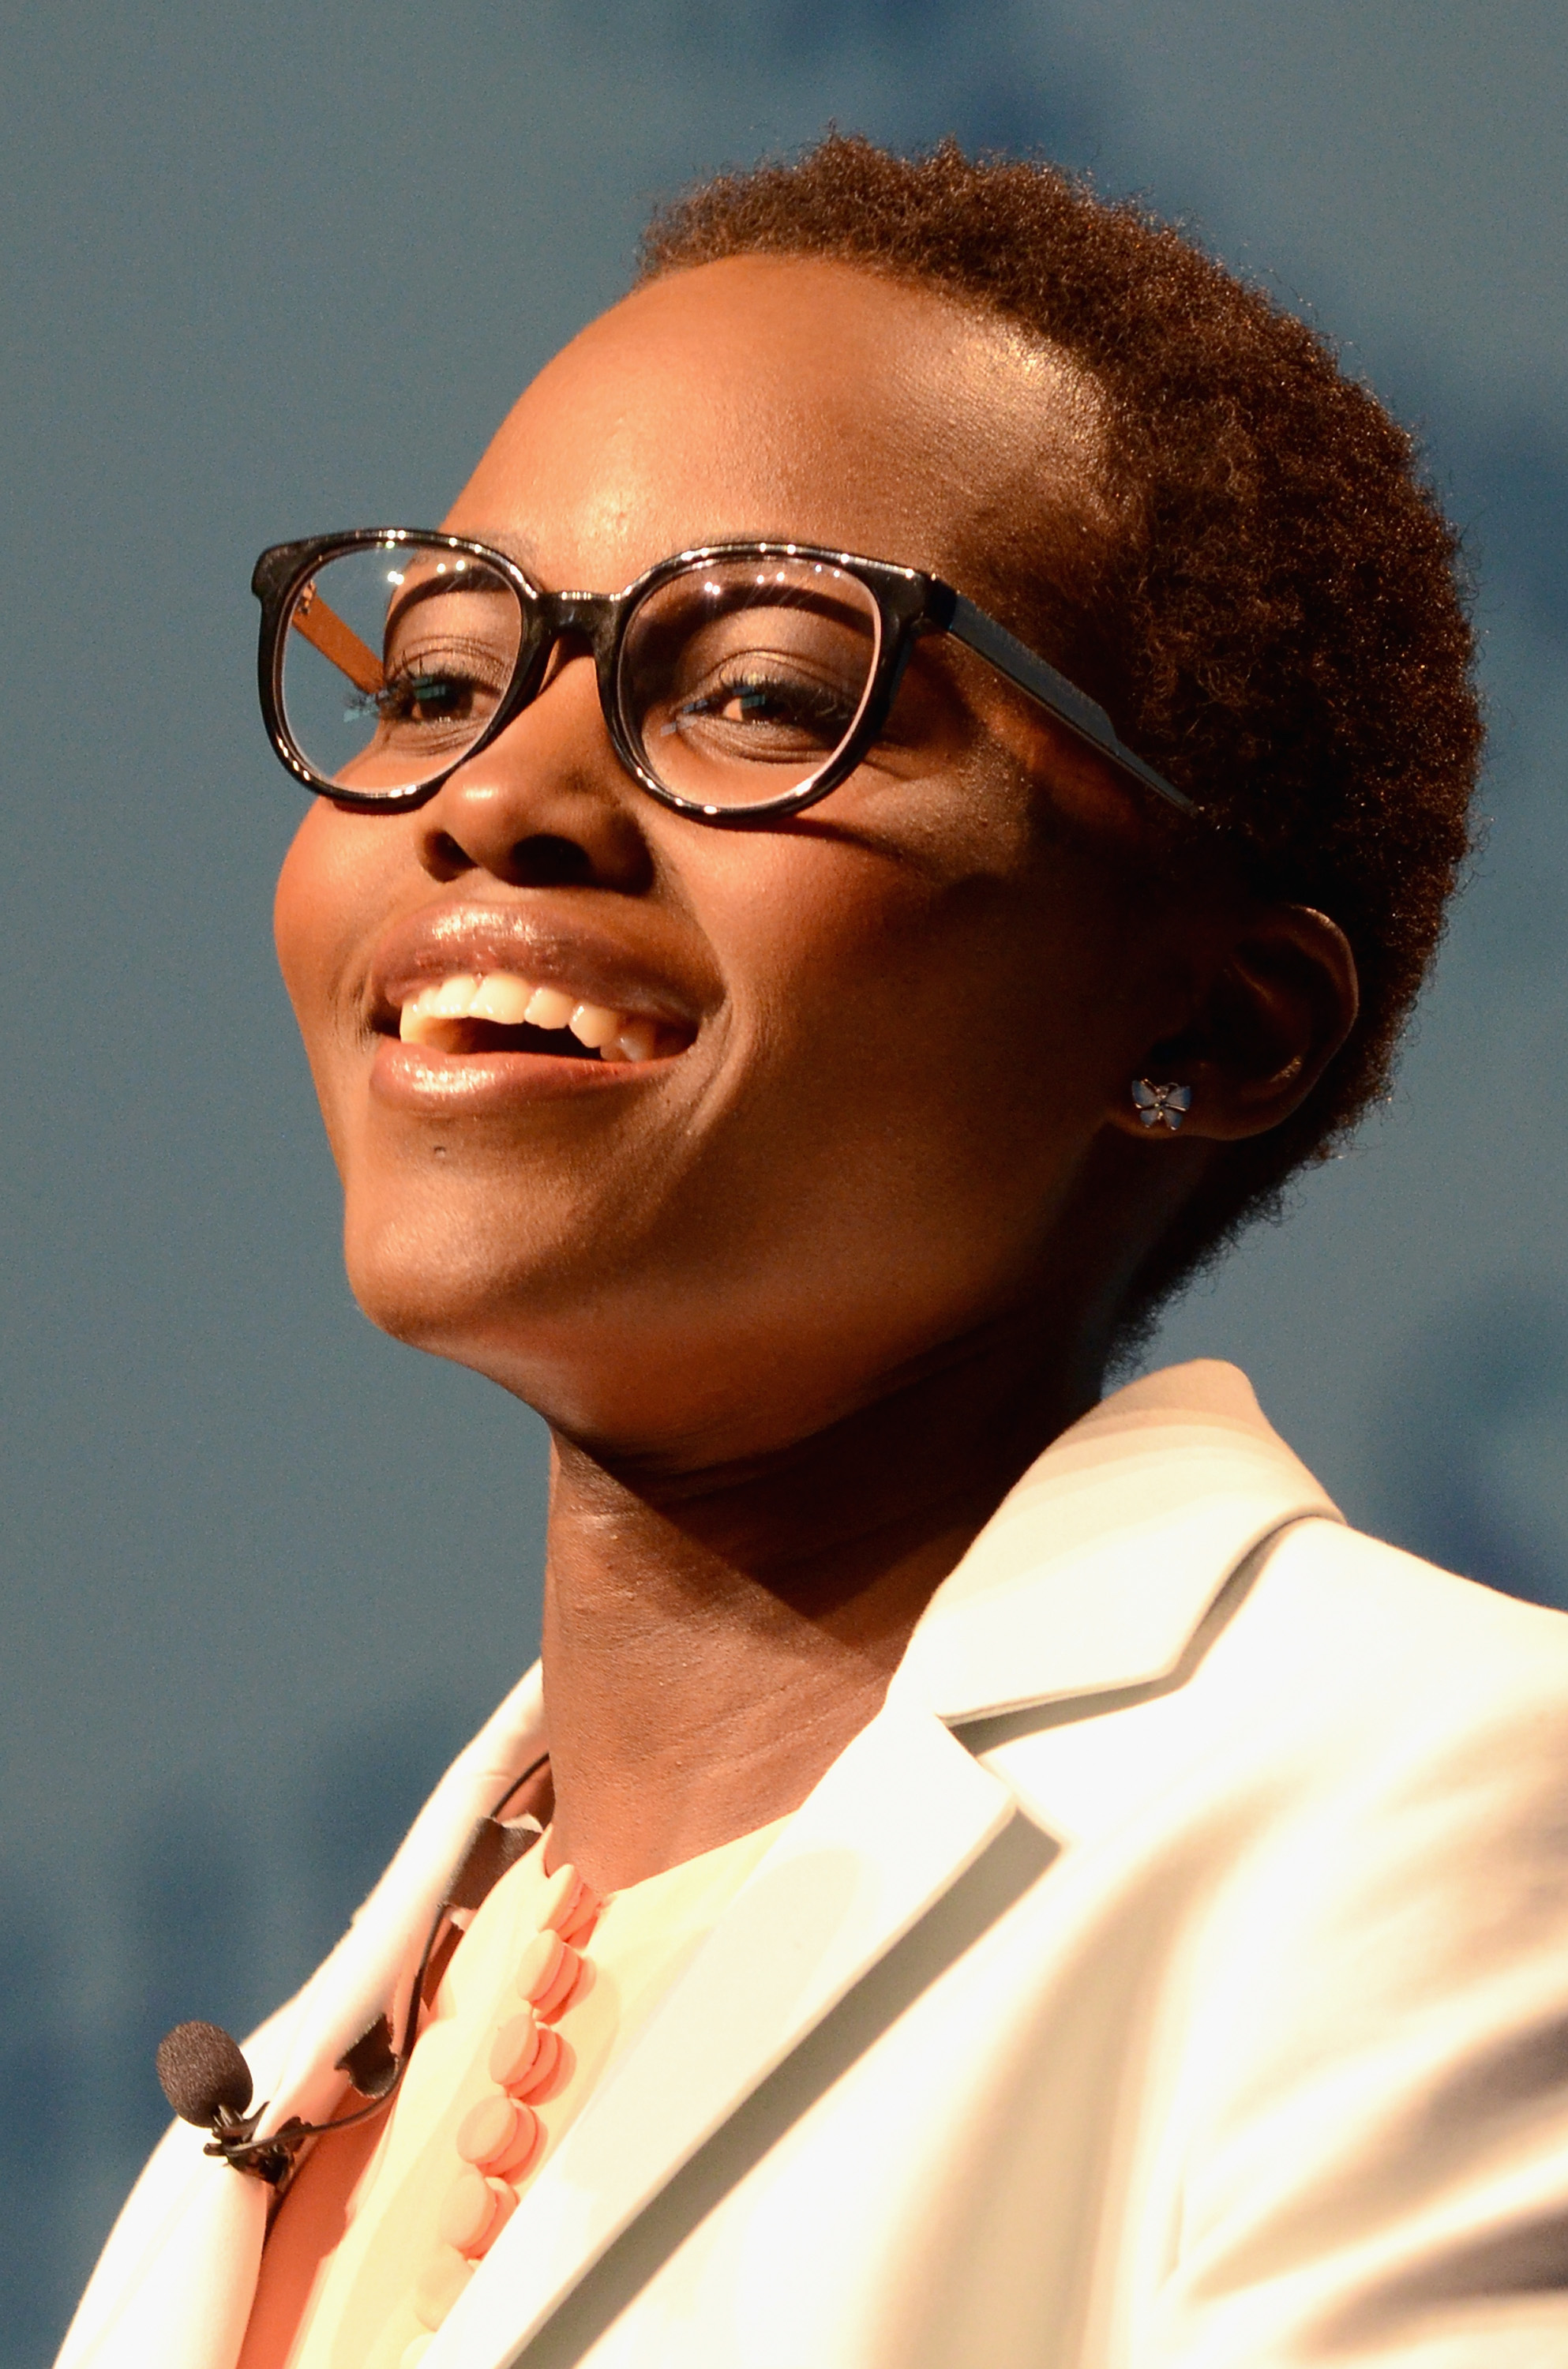 Actress Lupita Nyong'o speaks on stage at the 2014 Massachusetts Conference for Women (Lisa Lake&mdash;2014 Getty Images)